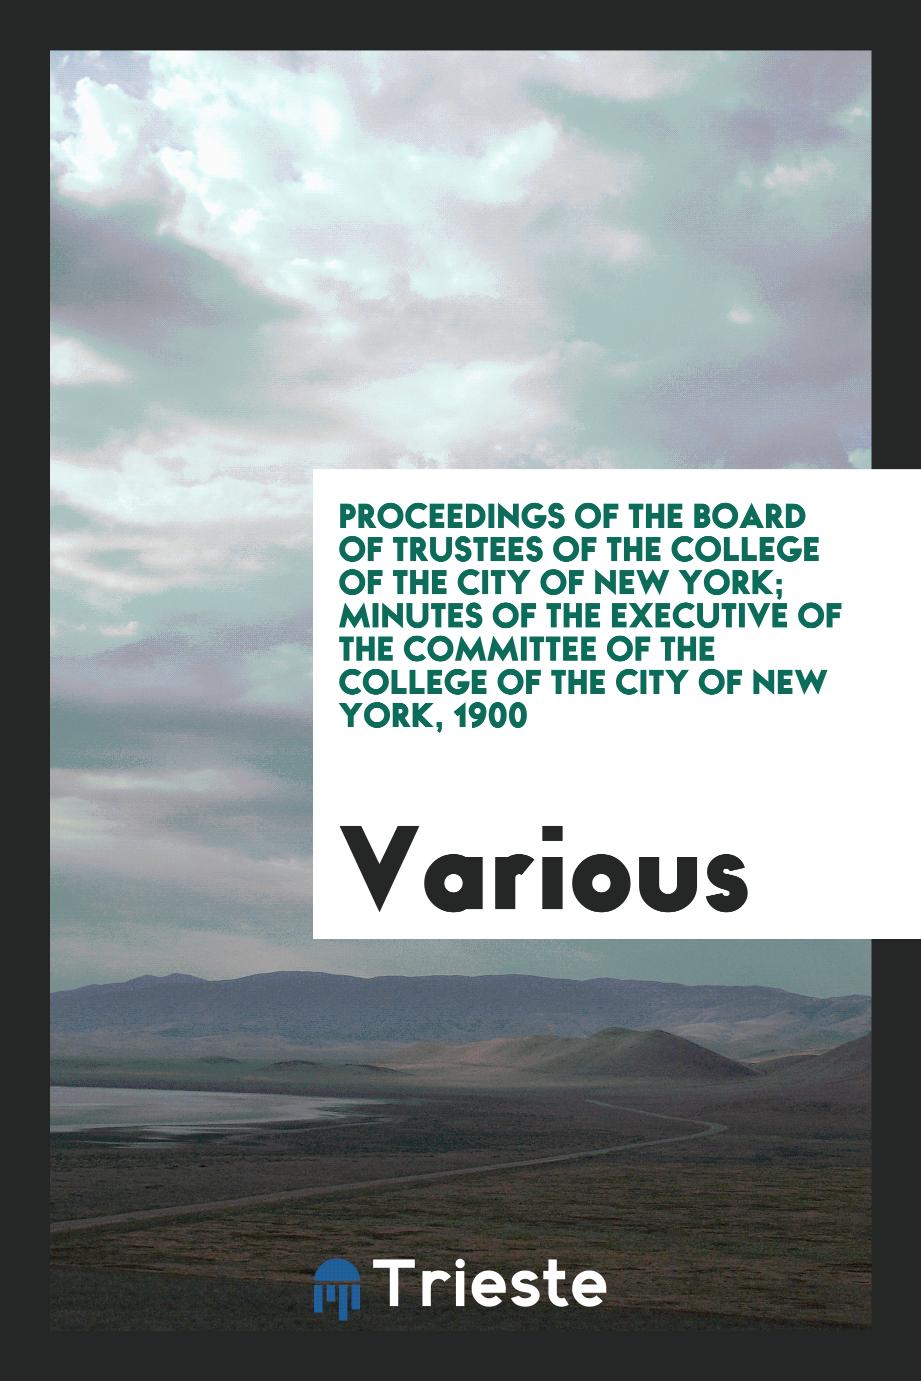 Proceedings of the Board of Trustees of the College of the City of New York; Minutes of the Executive of the Committee of the College of the City of New York, 1900